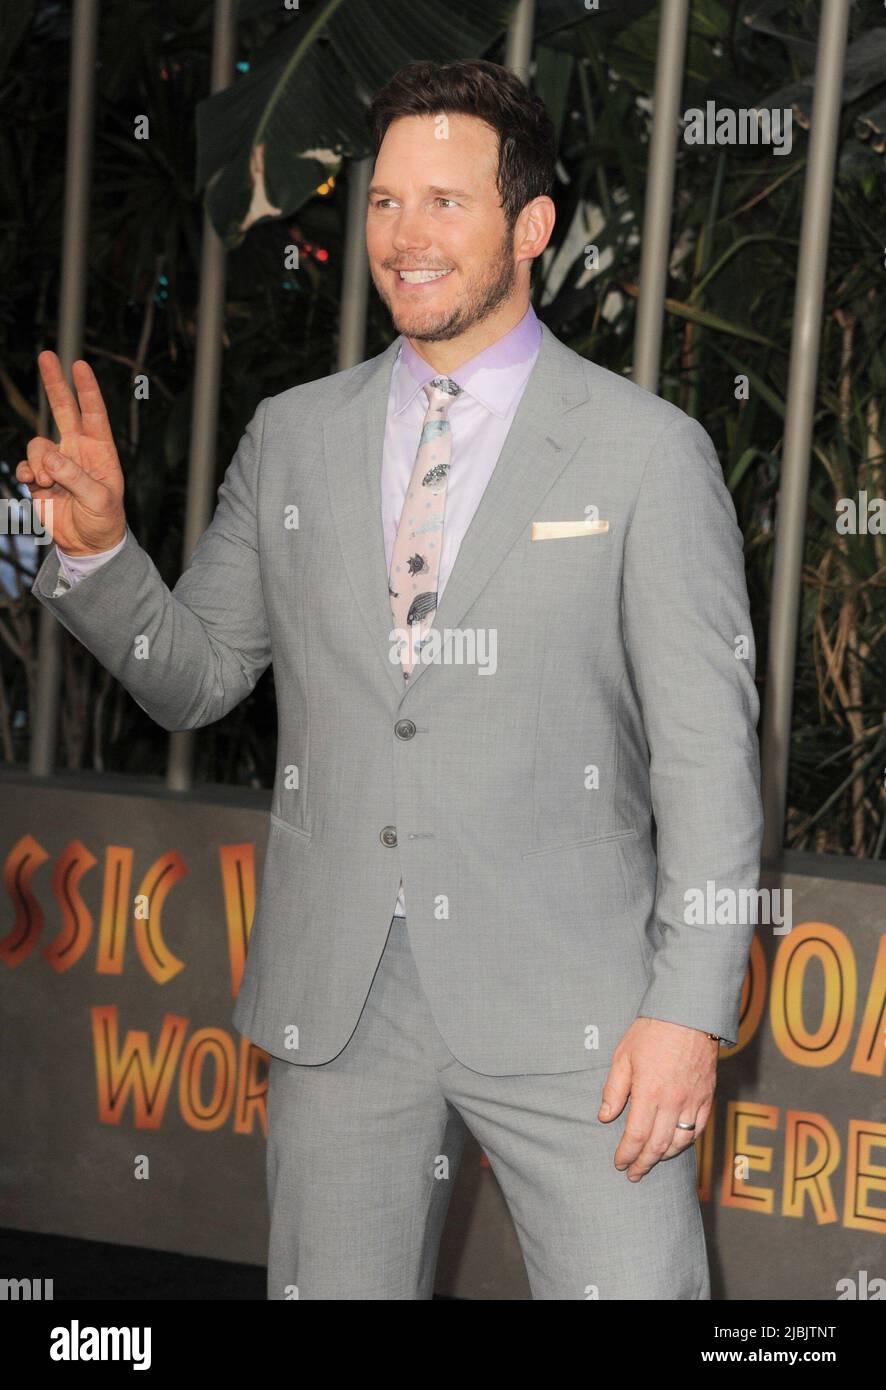 Los Angeles, CA. 6th June, 2022. Chris Pratt at arrivals for JURASSIC WORLD DOMINION Premiere, TCL Chinese Theatre, Los Angeles, CA June 6, 2022. Credit: Elizabeth Goodenough/Everett Collection/Alamy Live News Stock Photo